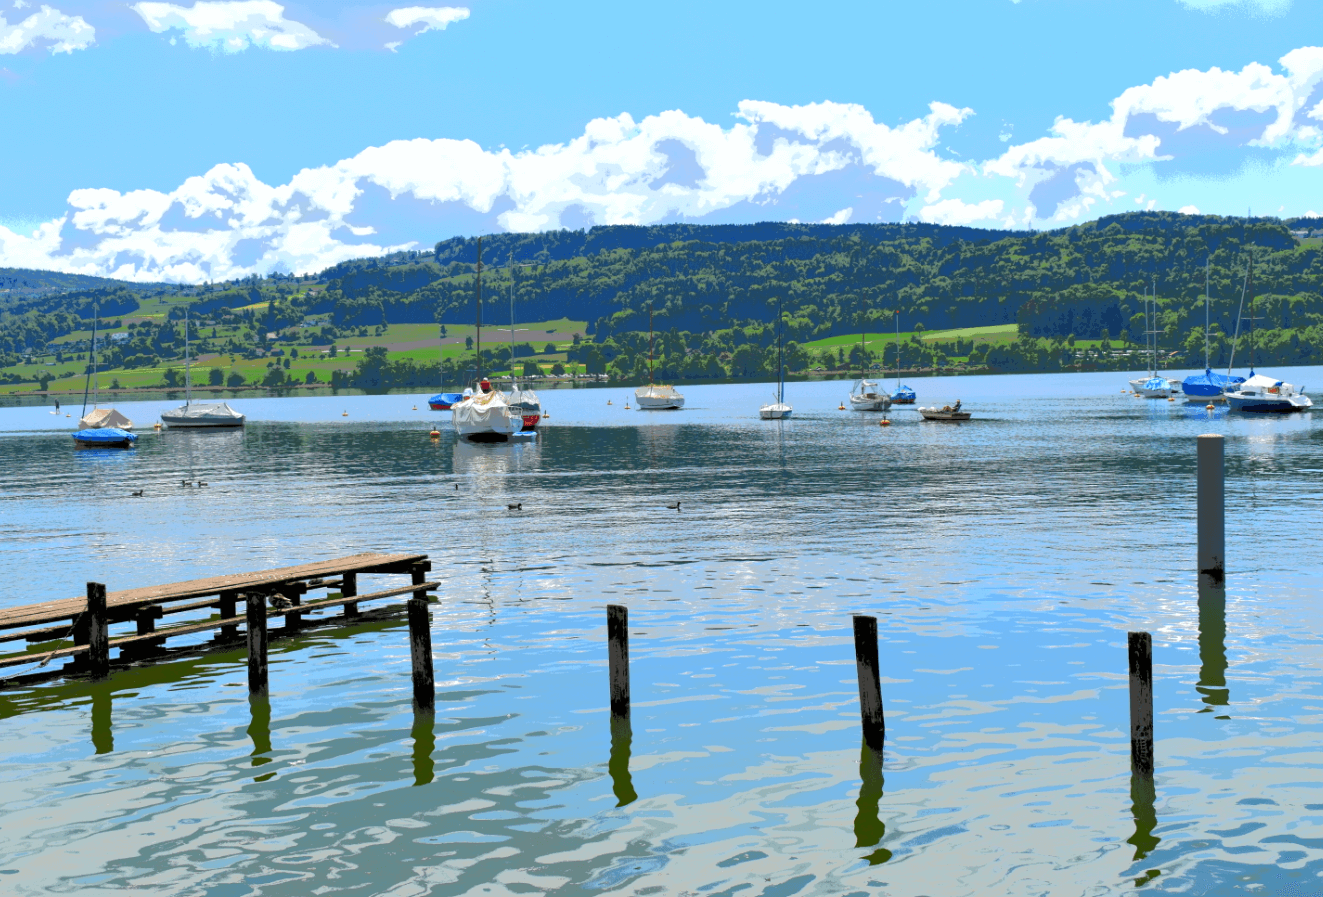 Lake with sailboats, small pier in foreground, green hills in background